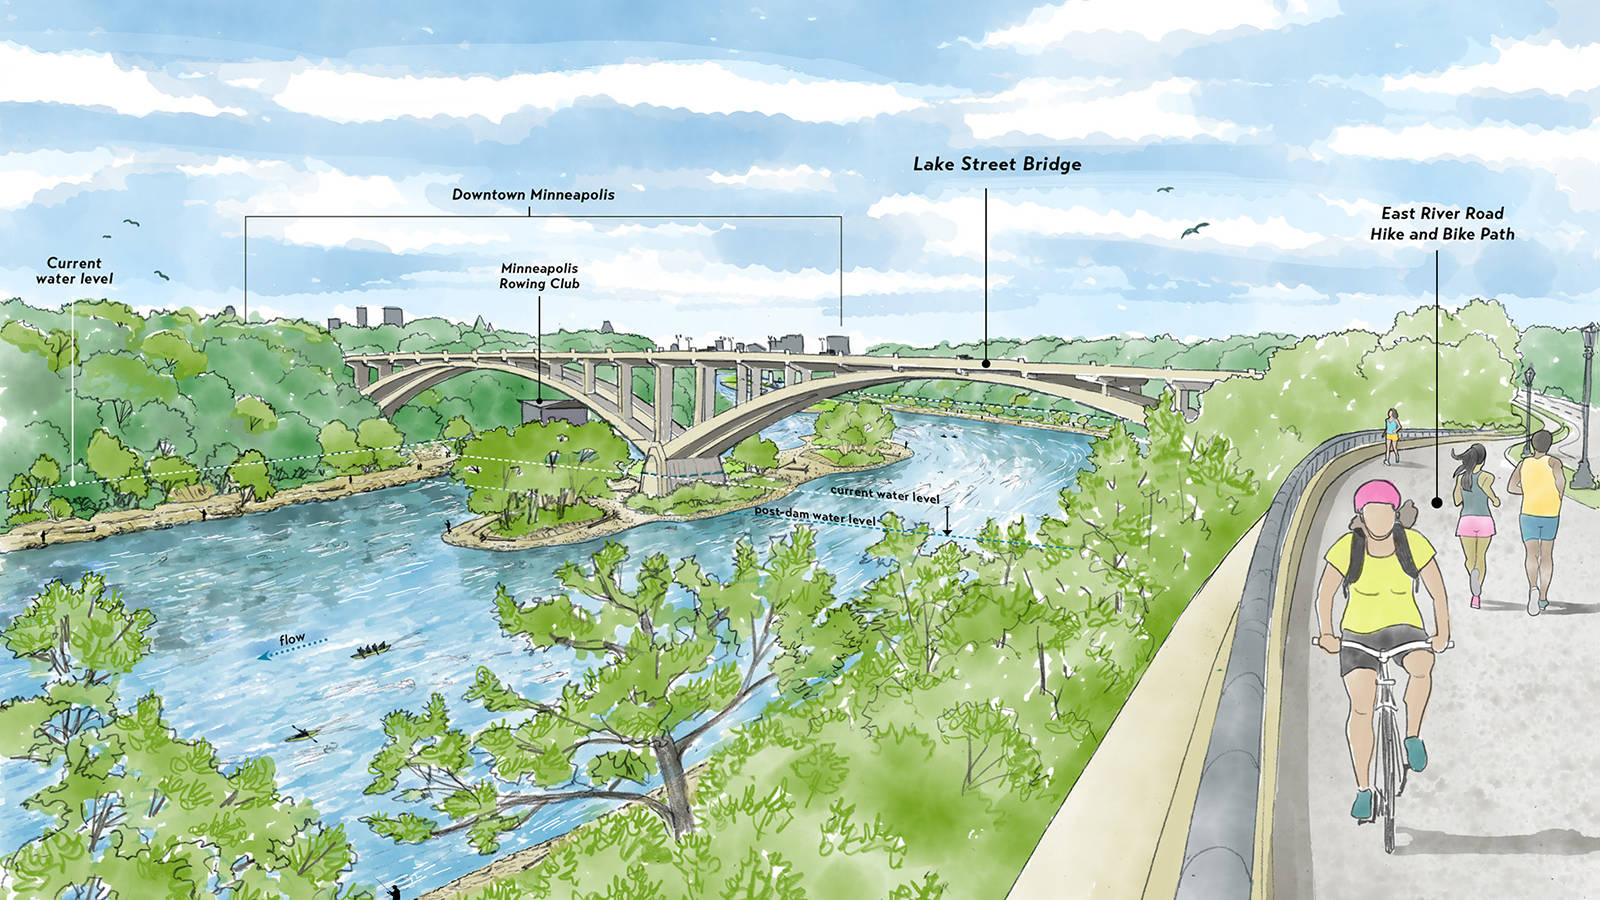 <p>Rendering of Lake Street/Marshall Avenue Bridge. Without the locks and dams, the river level could drop as much as 37 feet. The river above the bridge would become fast-flowing rapids at high water. Downstream from the bridge, the river would slow, and more islands could form.  </p>